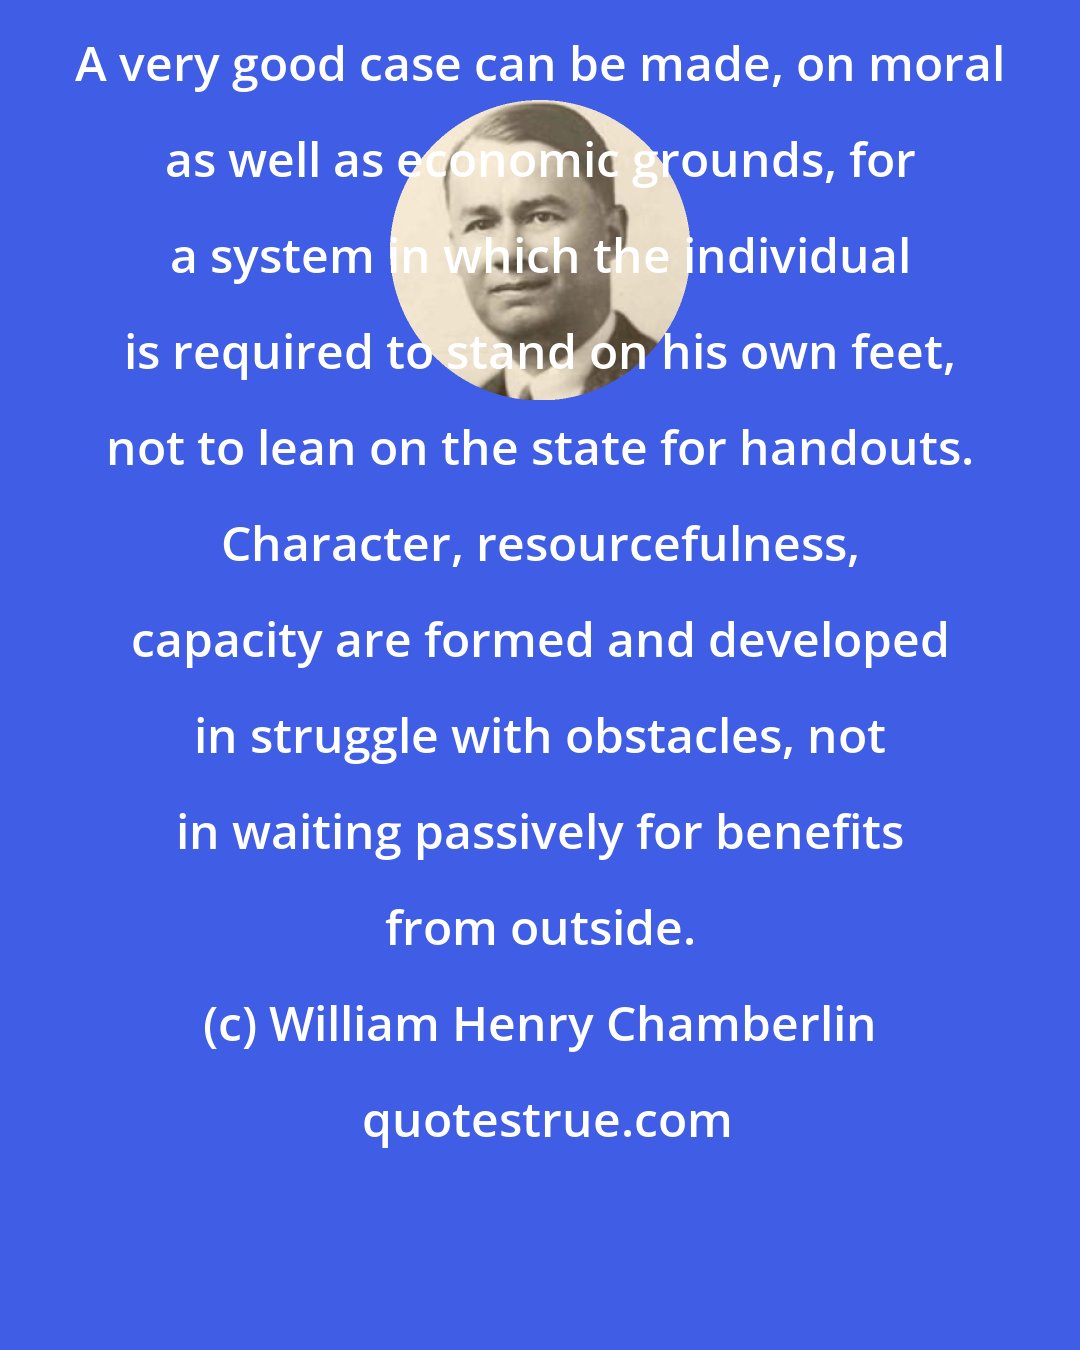 William Henry Chamberlin: A very good case can be made, on moral as well as economic grounds, for a system in which the individual is required to stand on his own feet, not to lean on the state for handouts. Character, resourcefulness, capacity are formed and developed in struggle with obstacles, not in waiting passively for benefits from outside.